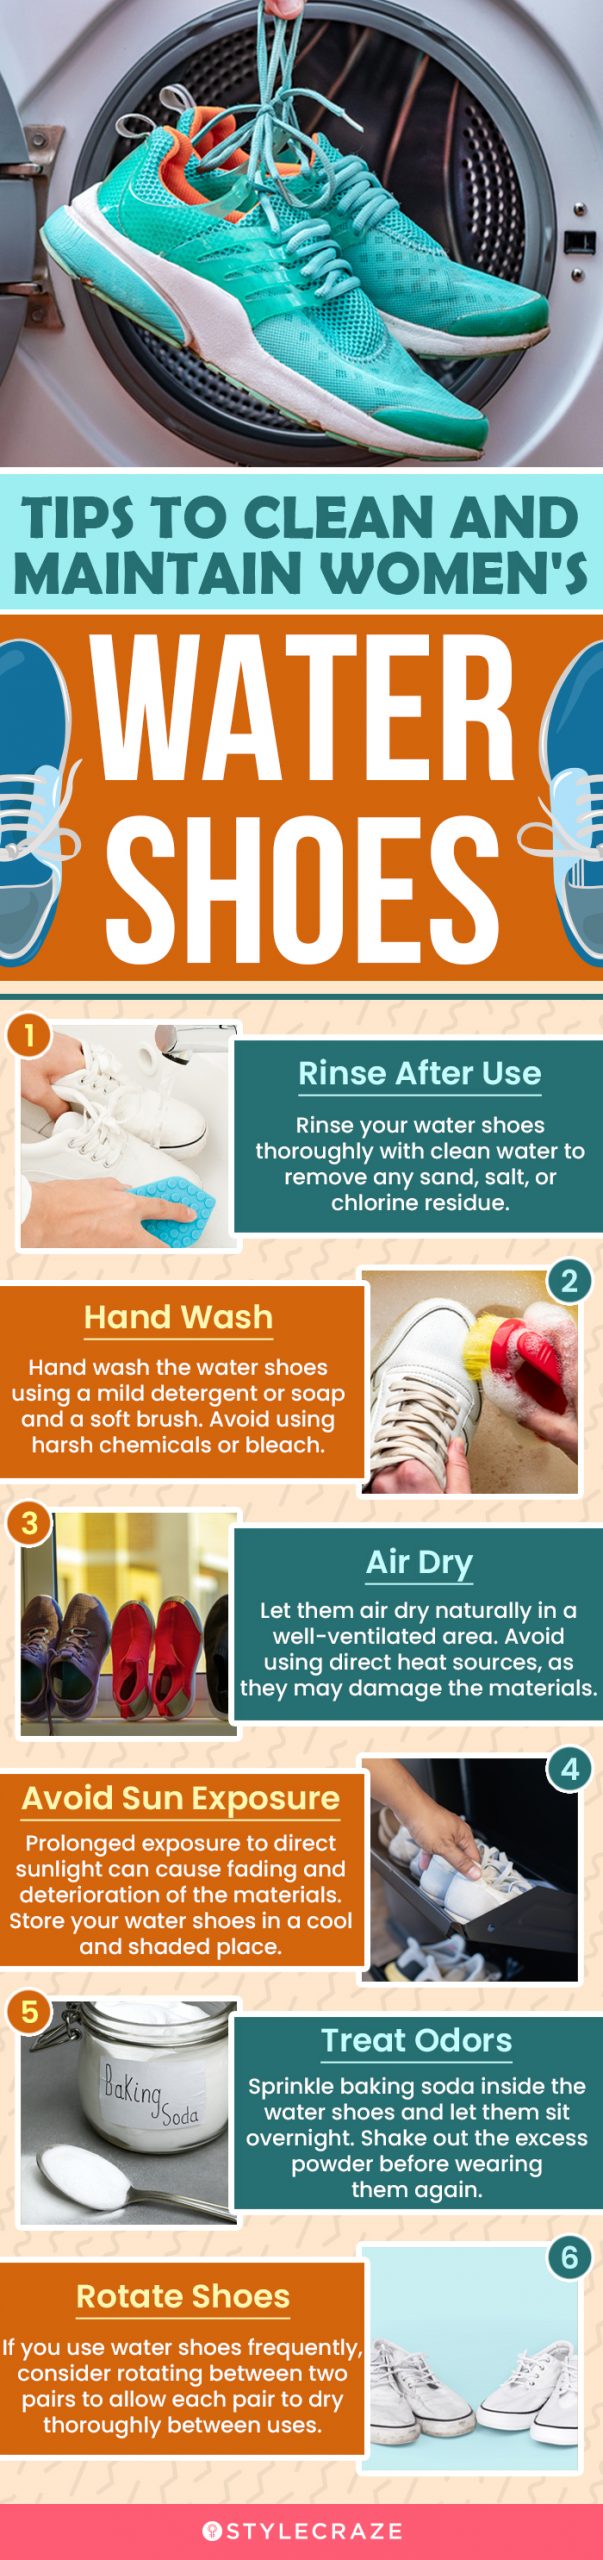 Tips To Clean And Maintain Women's Water Shoes (infographic)